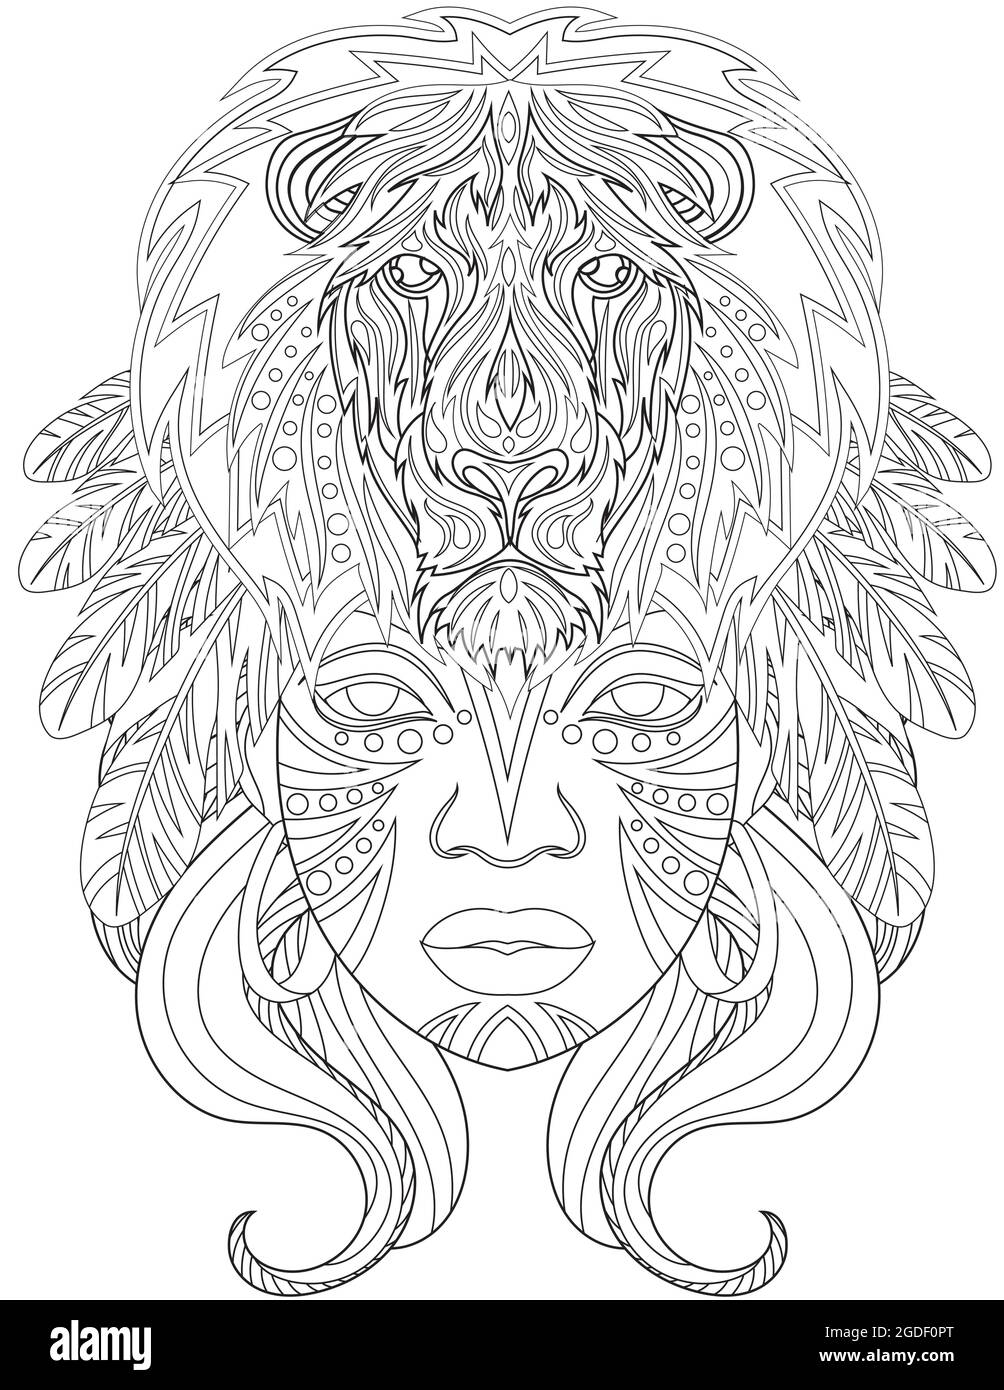 Woman With Lion Above Head Facing Forward With Feathers On Hair Colorless Line Drawing. Lady Long Hairstyle Front Looking Coloring Book Page. Stock Vector